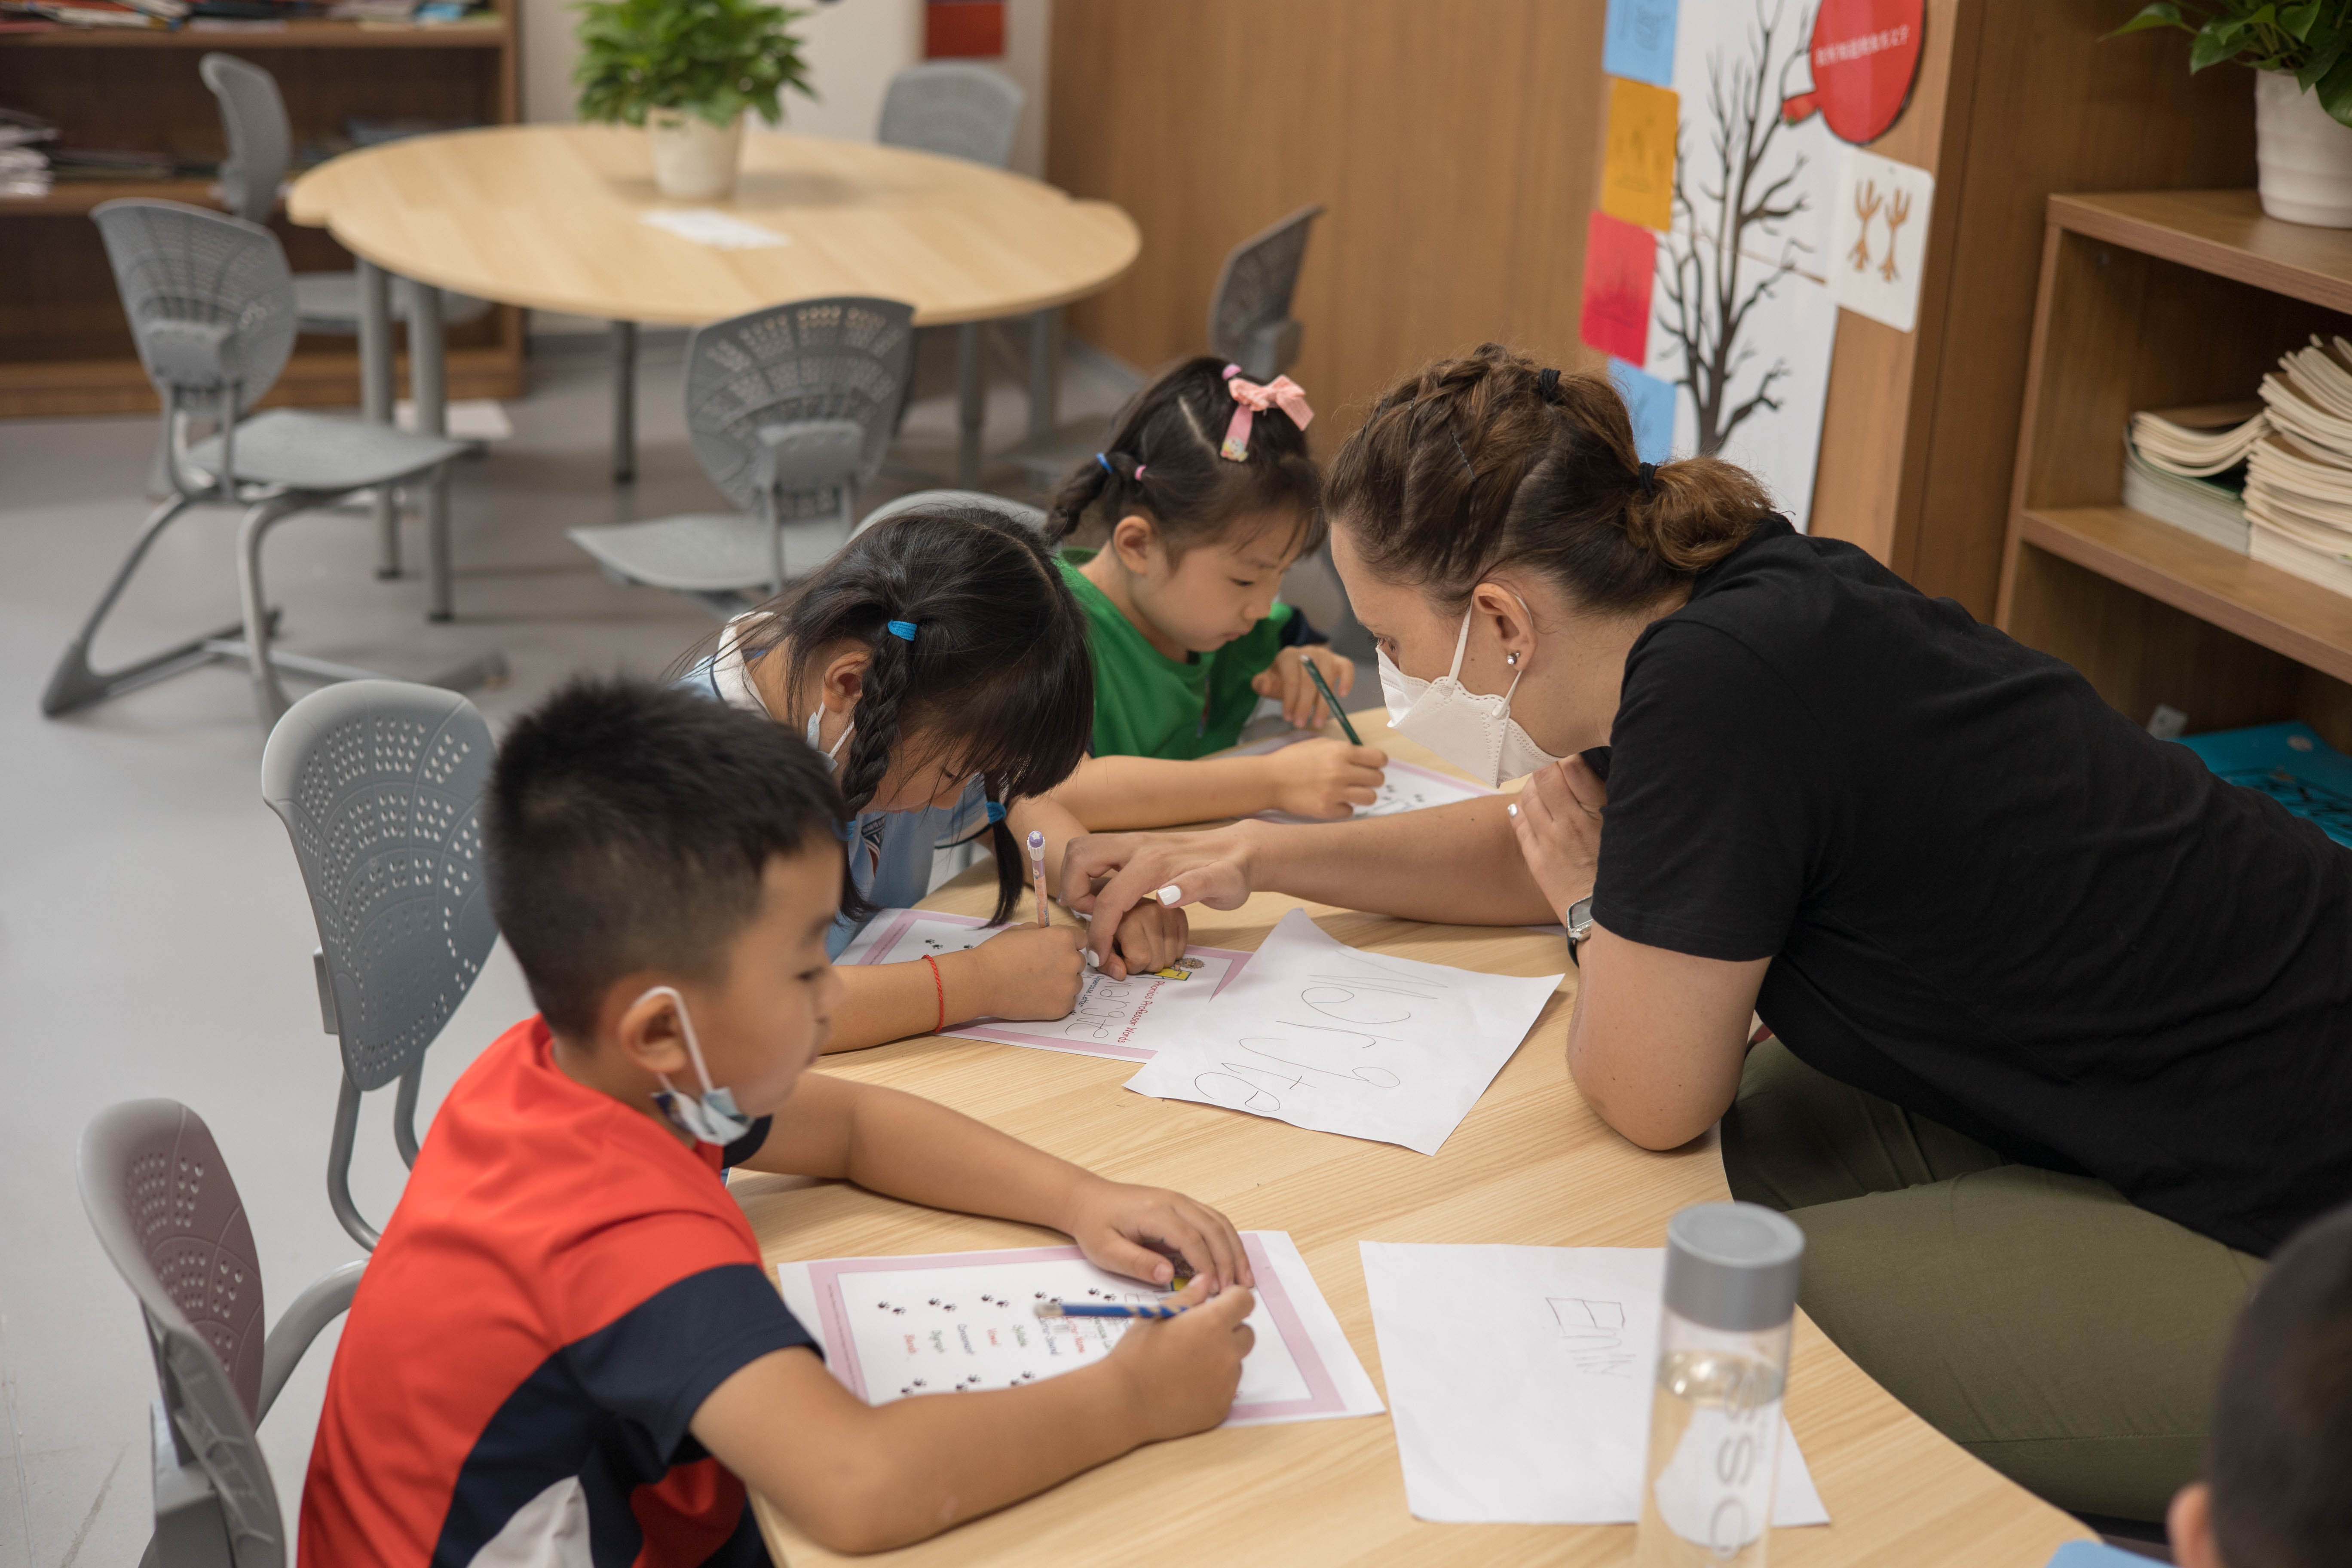 Stretching from VPA’s Bilingual Education